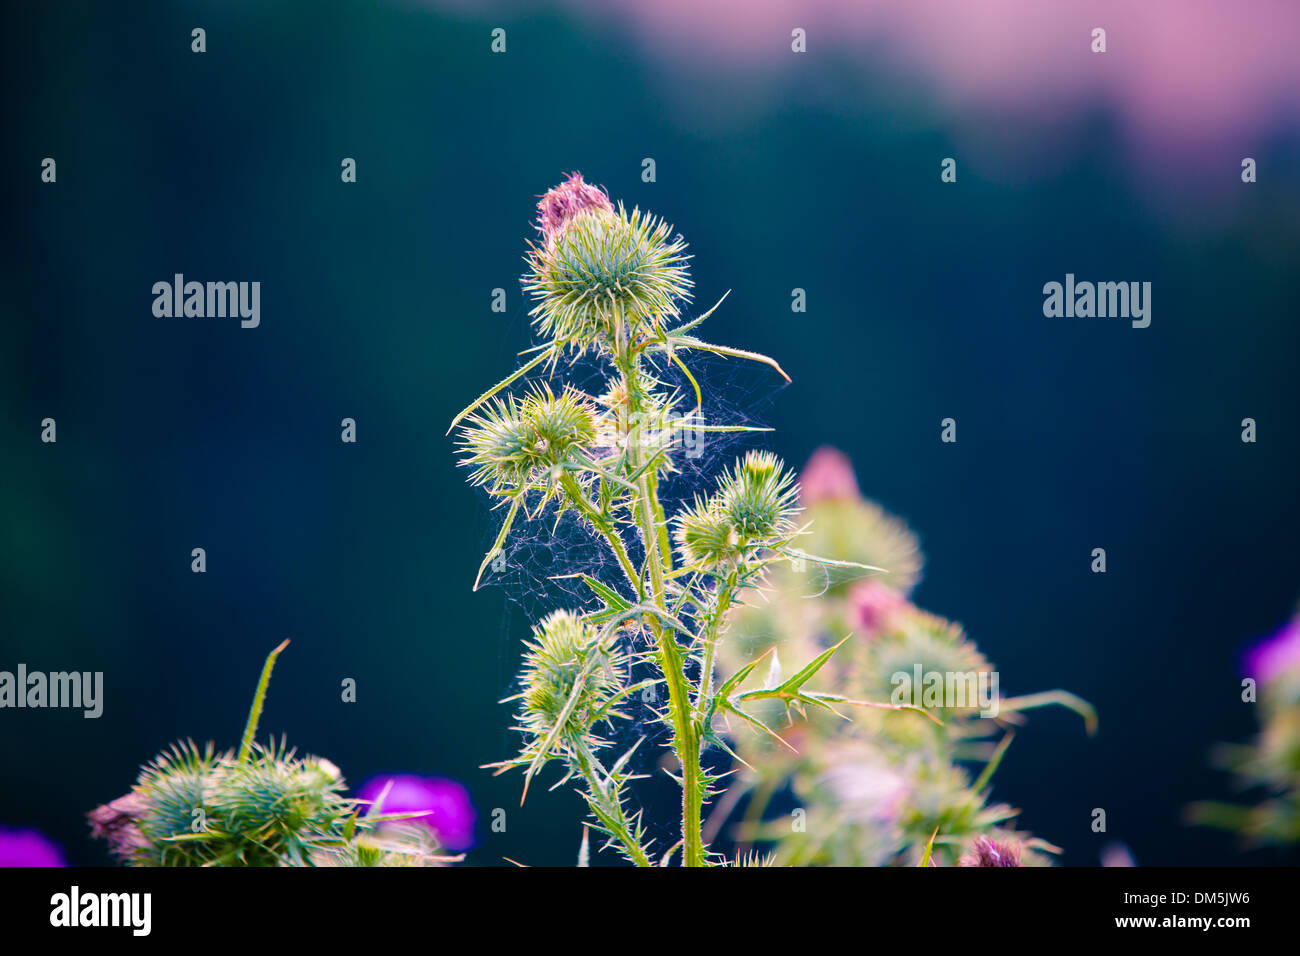 thistle flower plant on a dark background Stock Photo